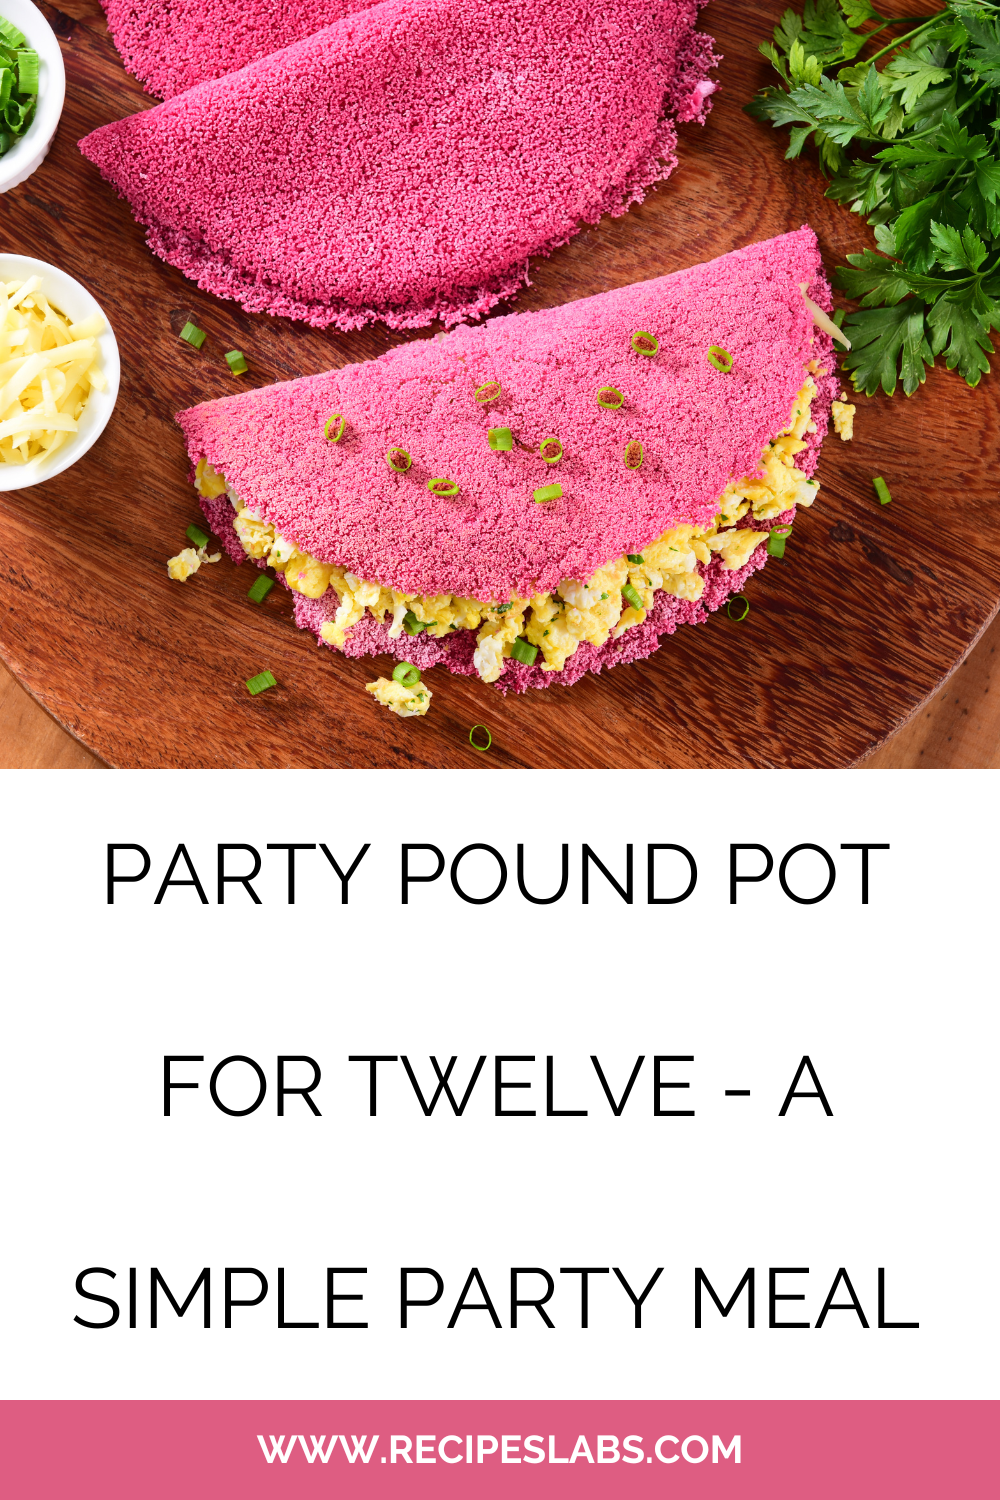 Party Pound Pot For Twelve - A Simple Party Meal